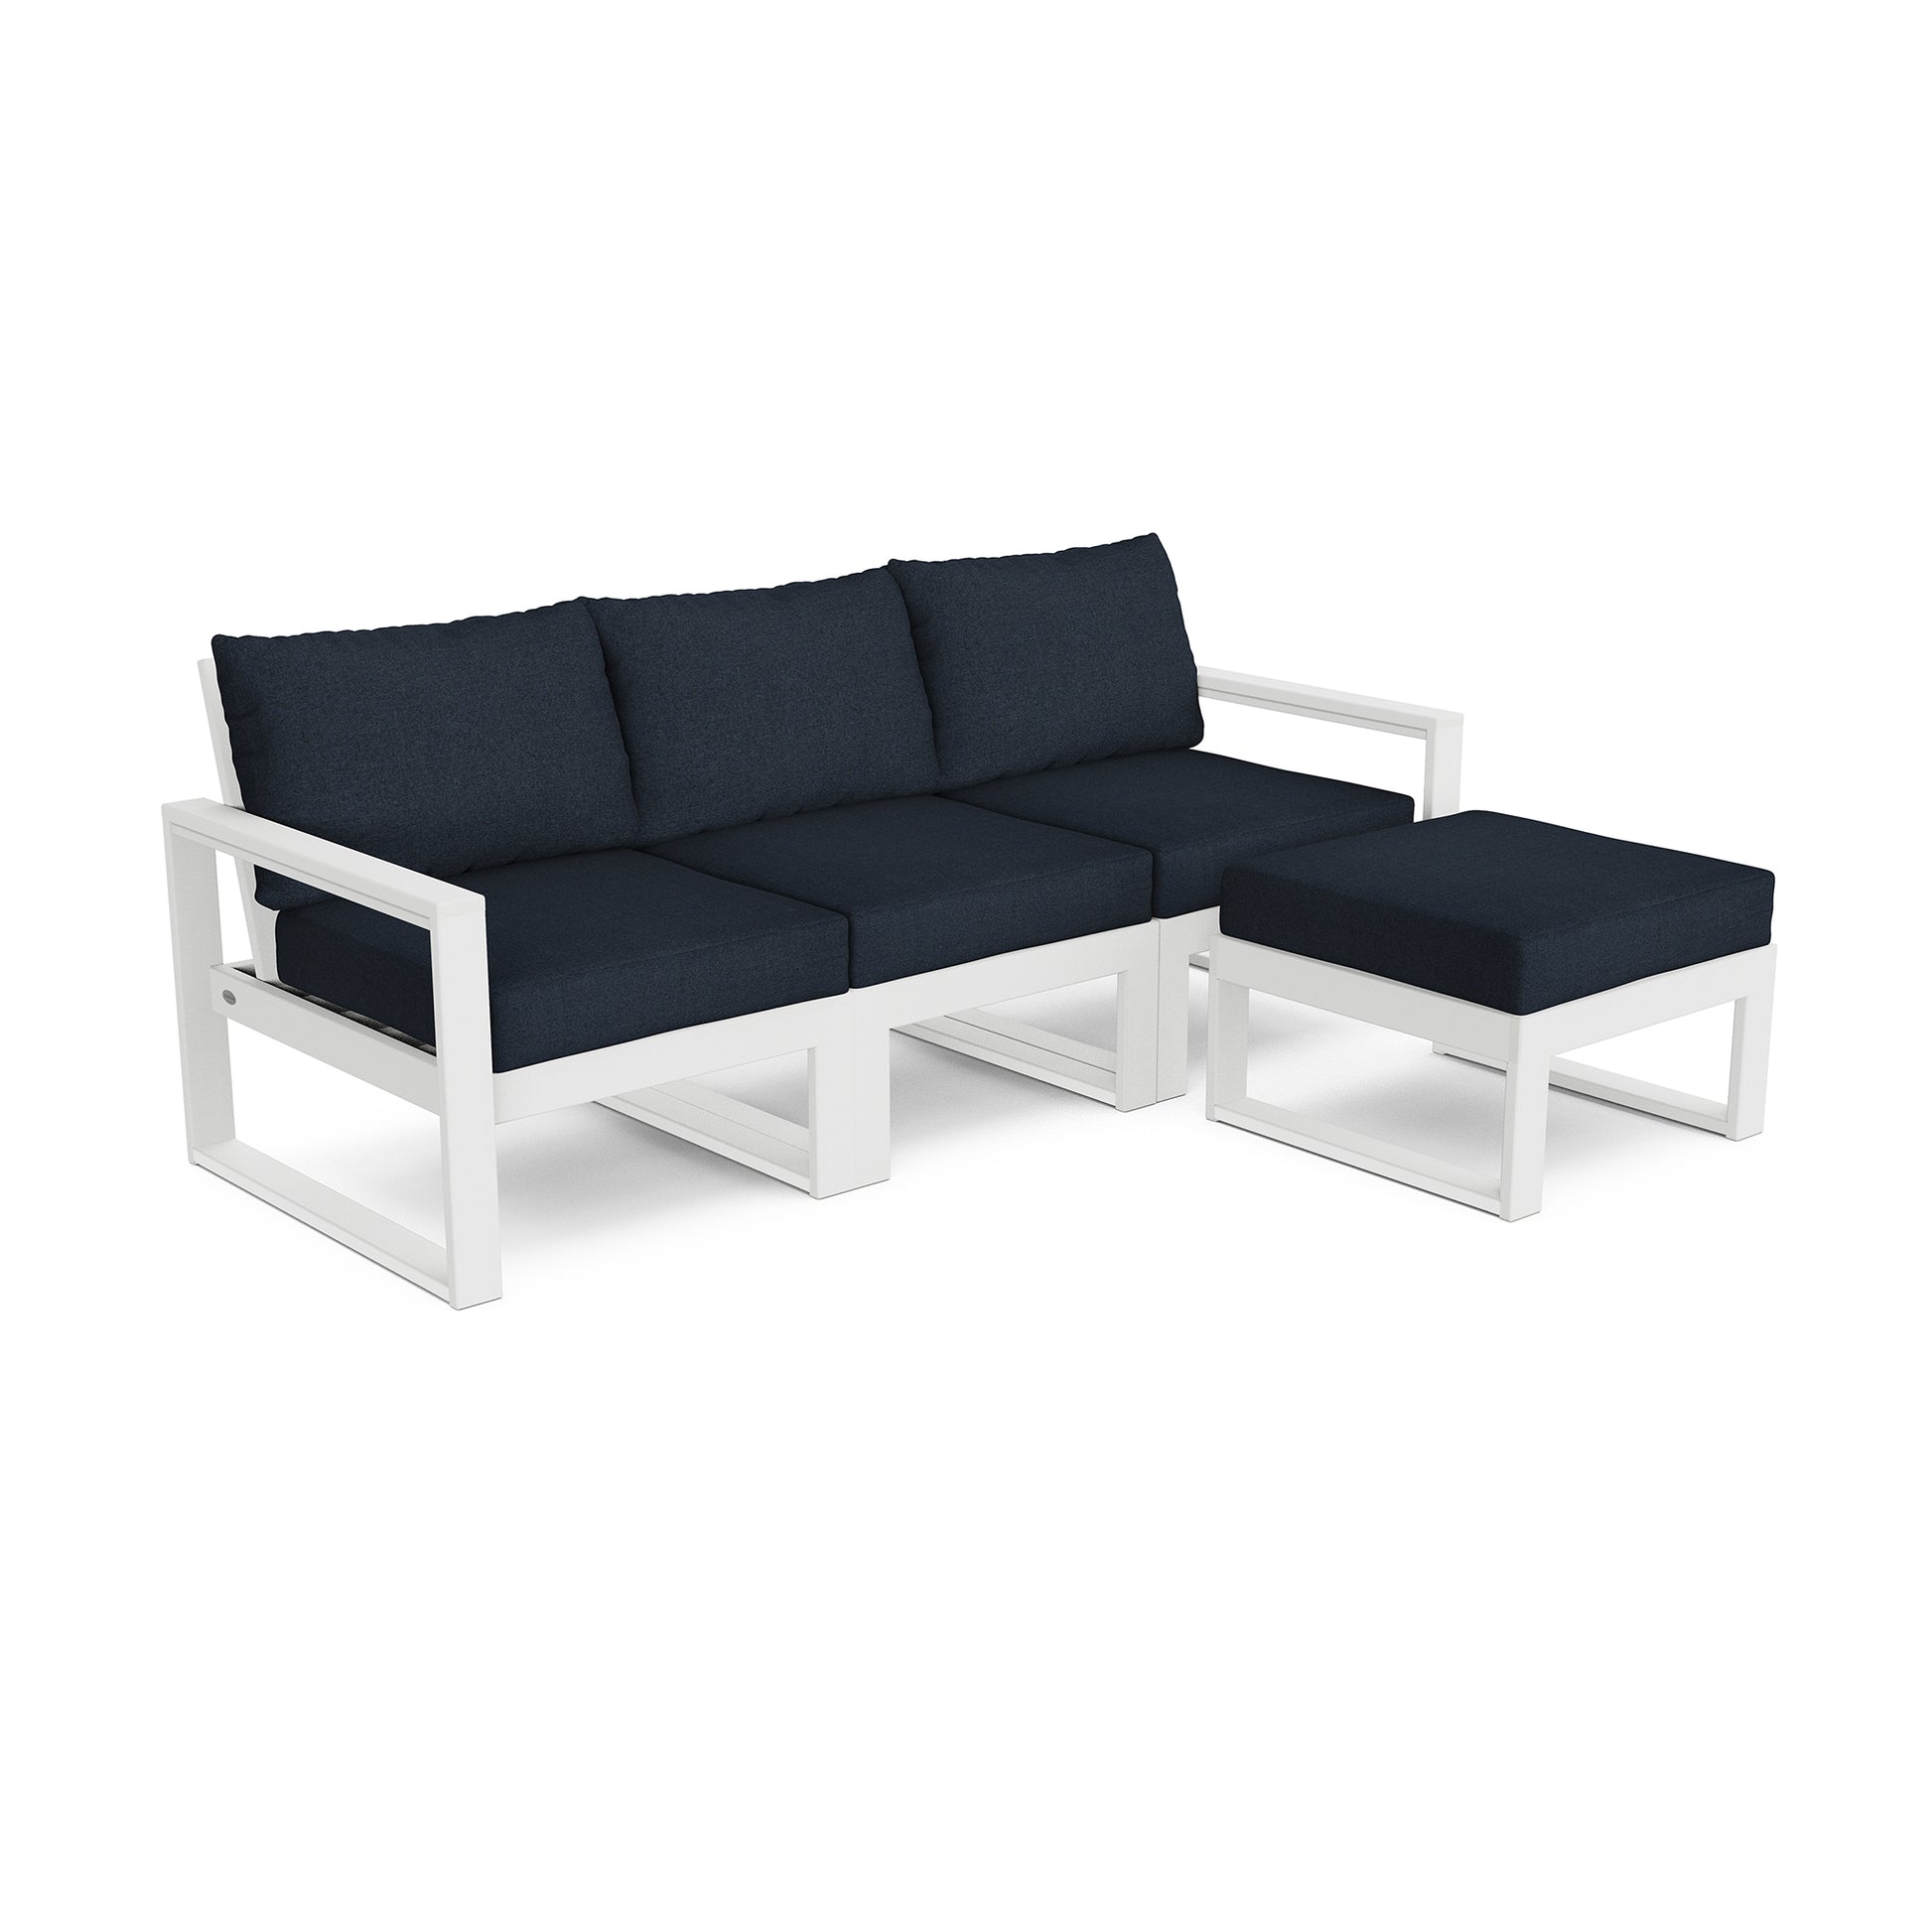 A modern POLYWOOD EDGE 4-Piece Modular Deep Seating Set with Ottoman featuring a white frame with deep blue cushions. This set includes a three-seat sofa and a matching ottoman, all on a clean white background.